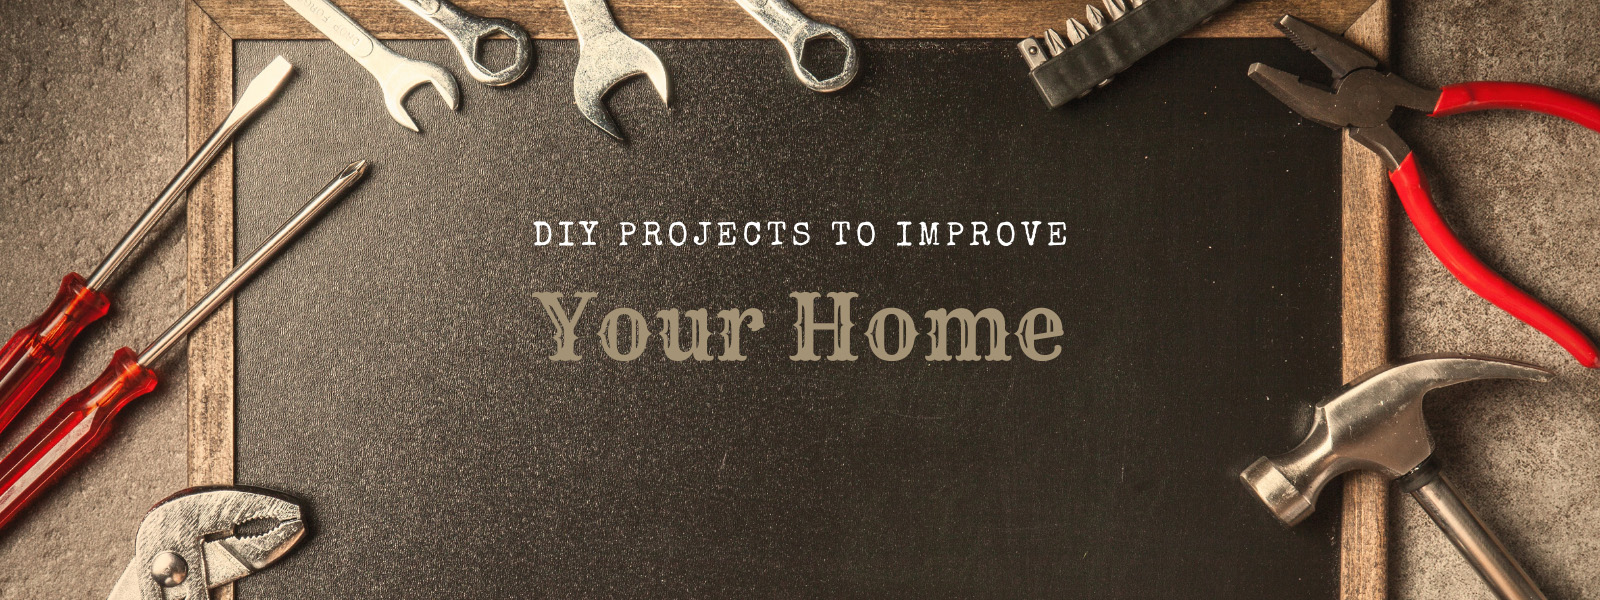 DIY projects to improve your home